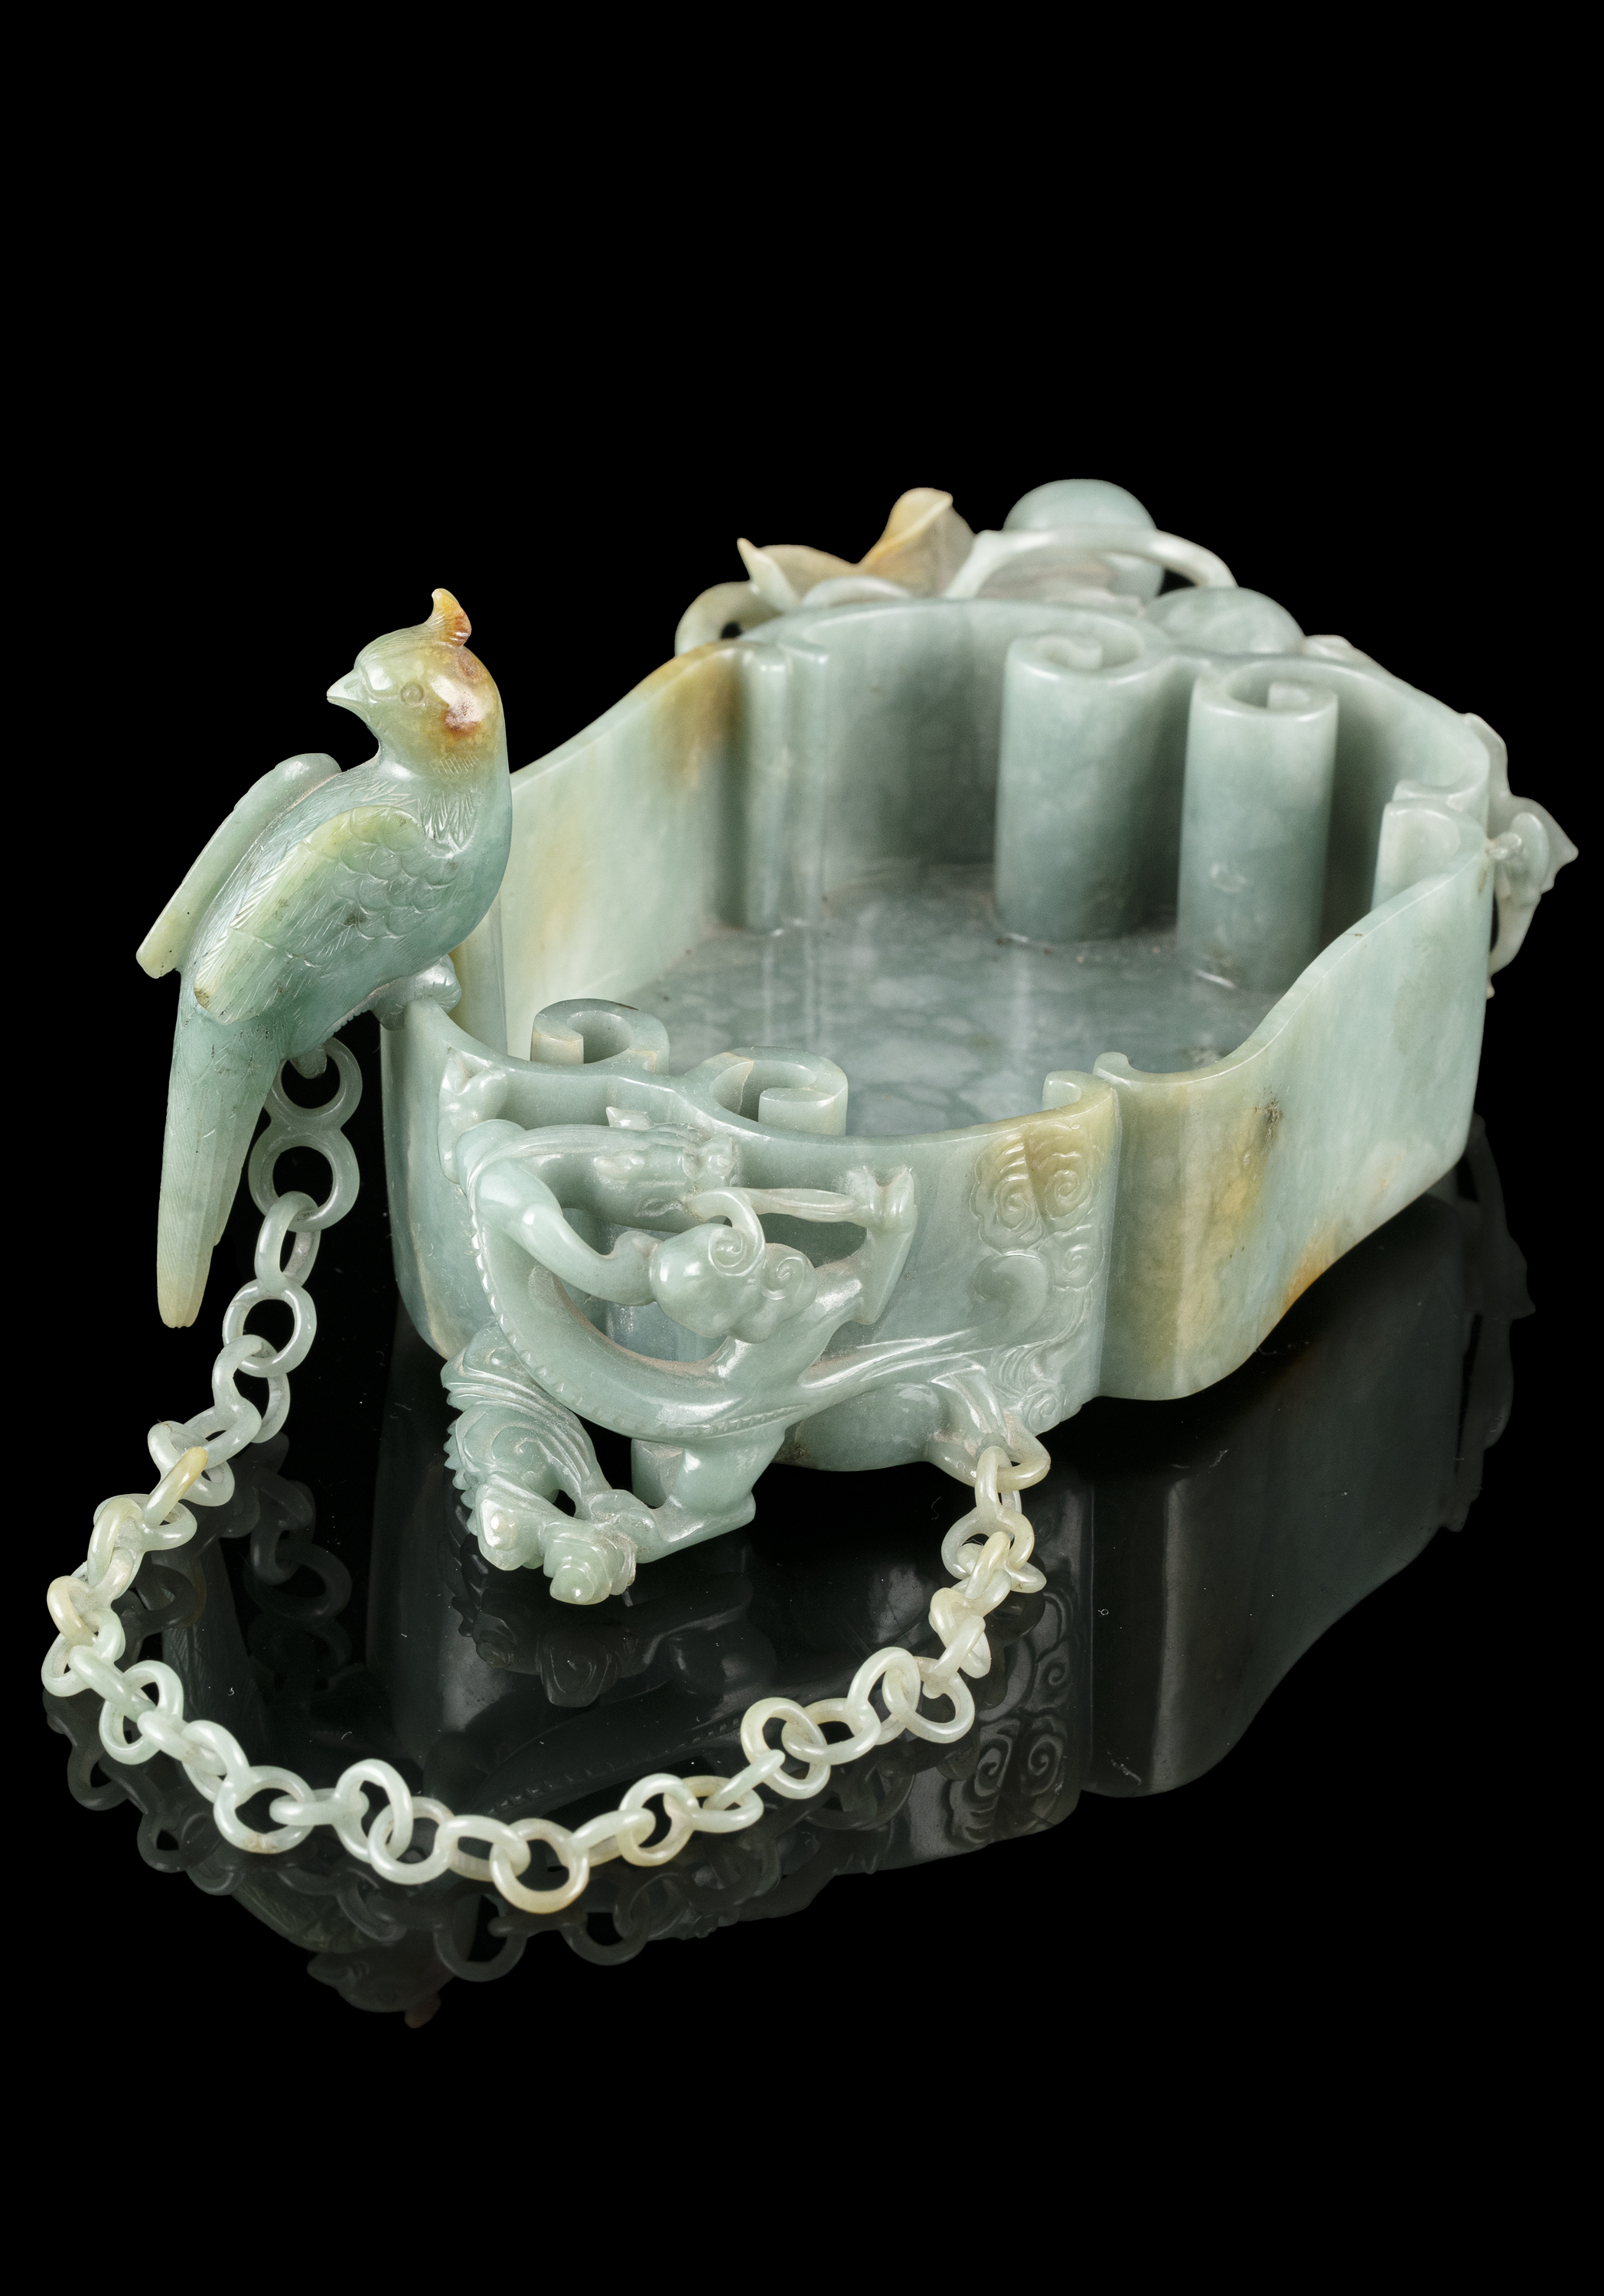 A LINGZHI-SHAPED JADEITE JADE BRUSHWASHER WITH A PARROT China, Qing Dynasty, 19th century - Image 10 of 35